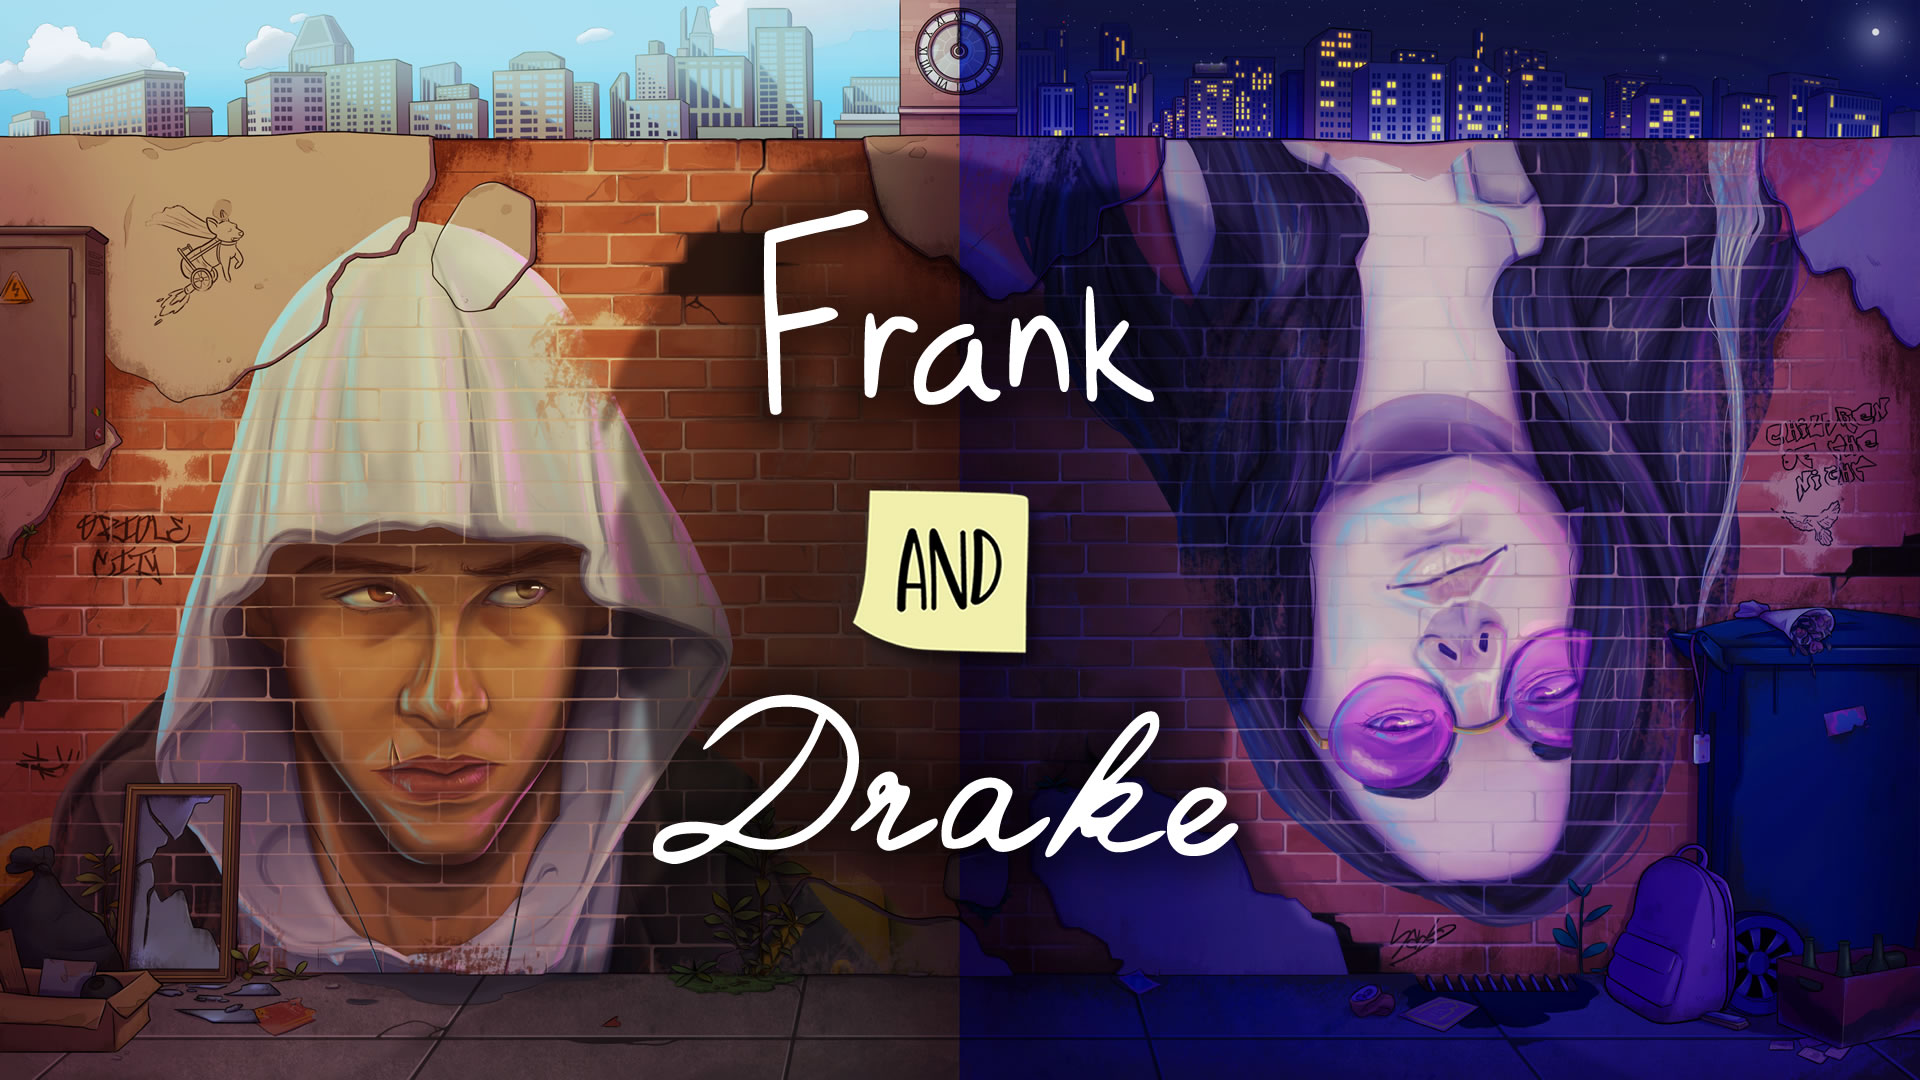 Frank and Drake: Discovering Artistic Cohesion in Variety